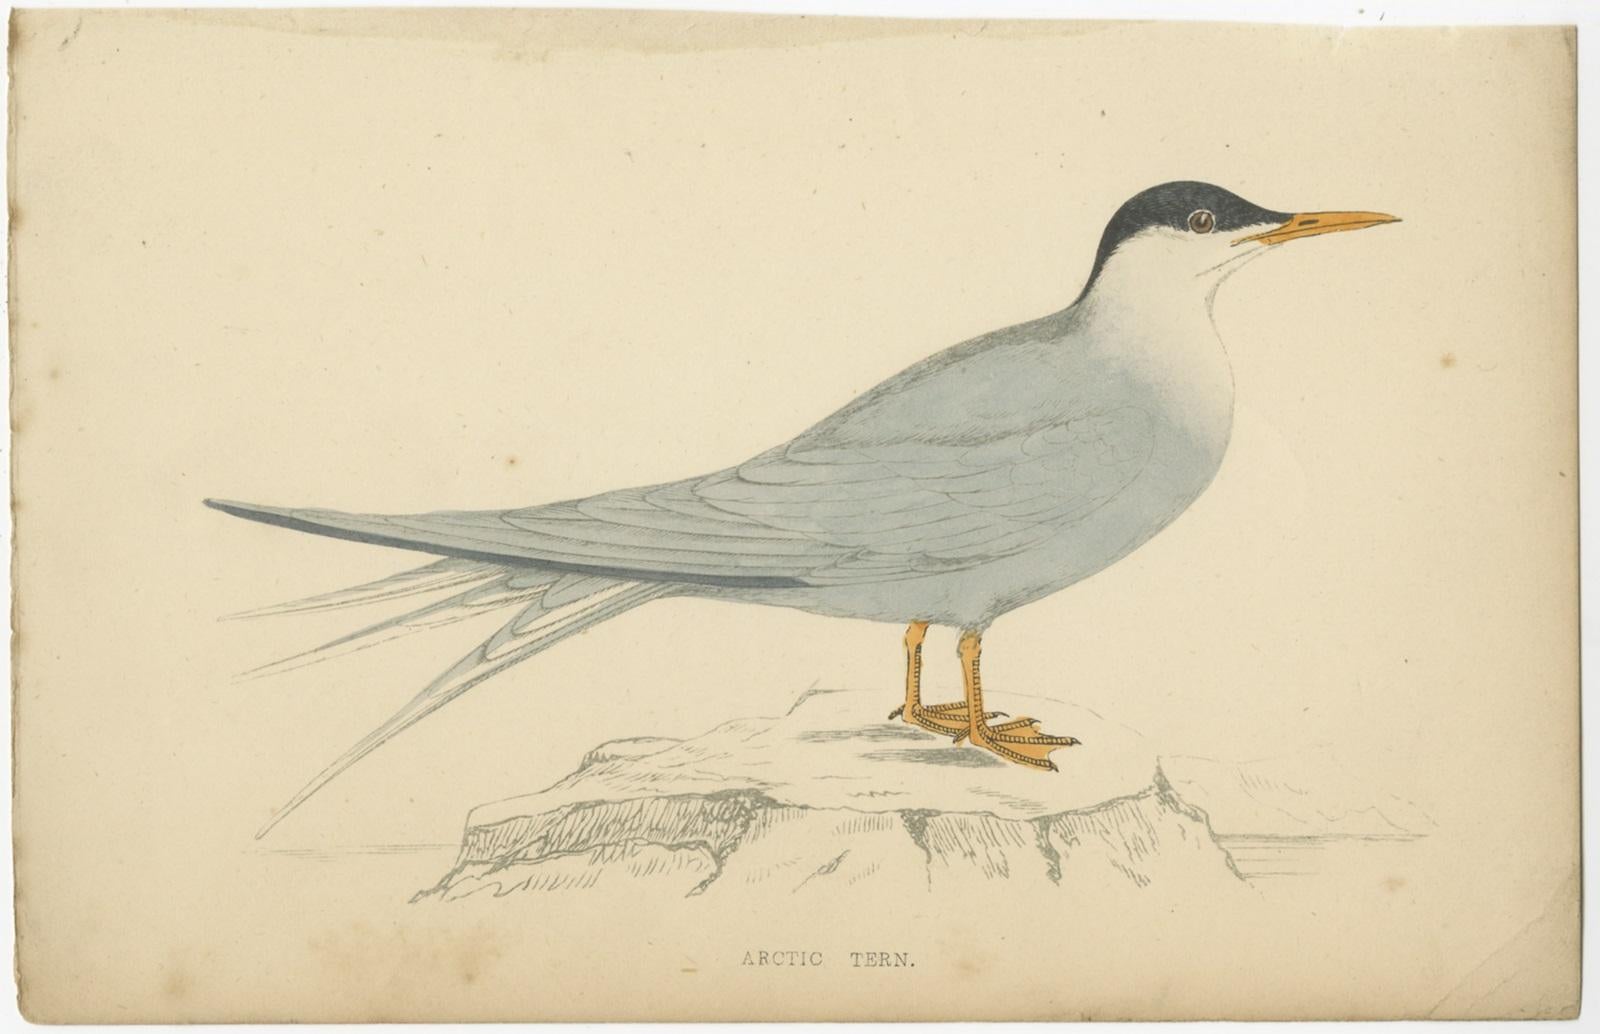 Set of ten antique bird prints titled 'Alpine Accentor - Stormy Petrel - Gull-Billed Tern - Roseate Tern - Sooty Tern - Sandwich Tern - Swift Tern - Common Tern - Whiskered Tern - Arctic Tern', circa 1867. These prints originate from 'A History of